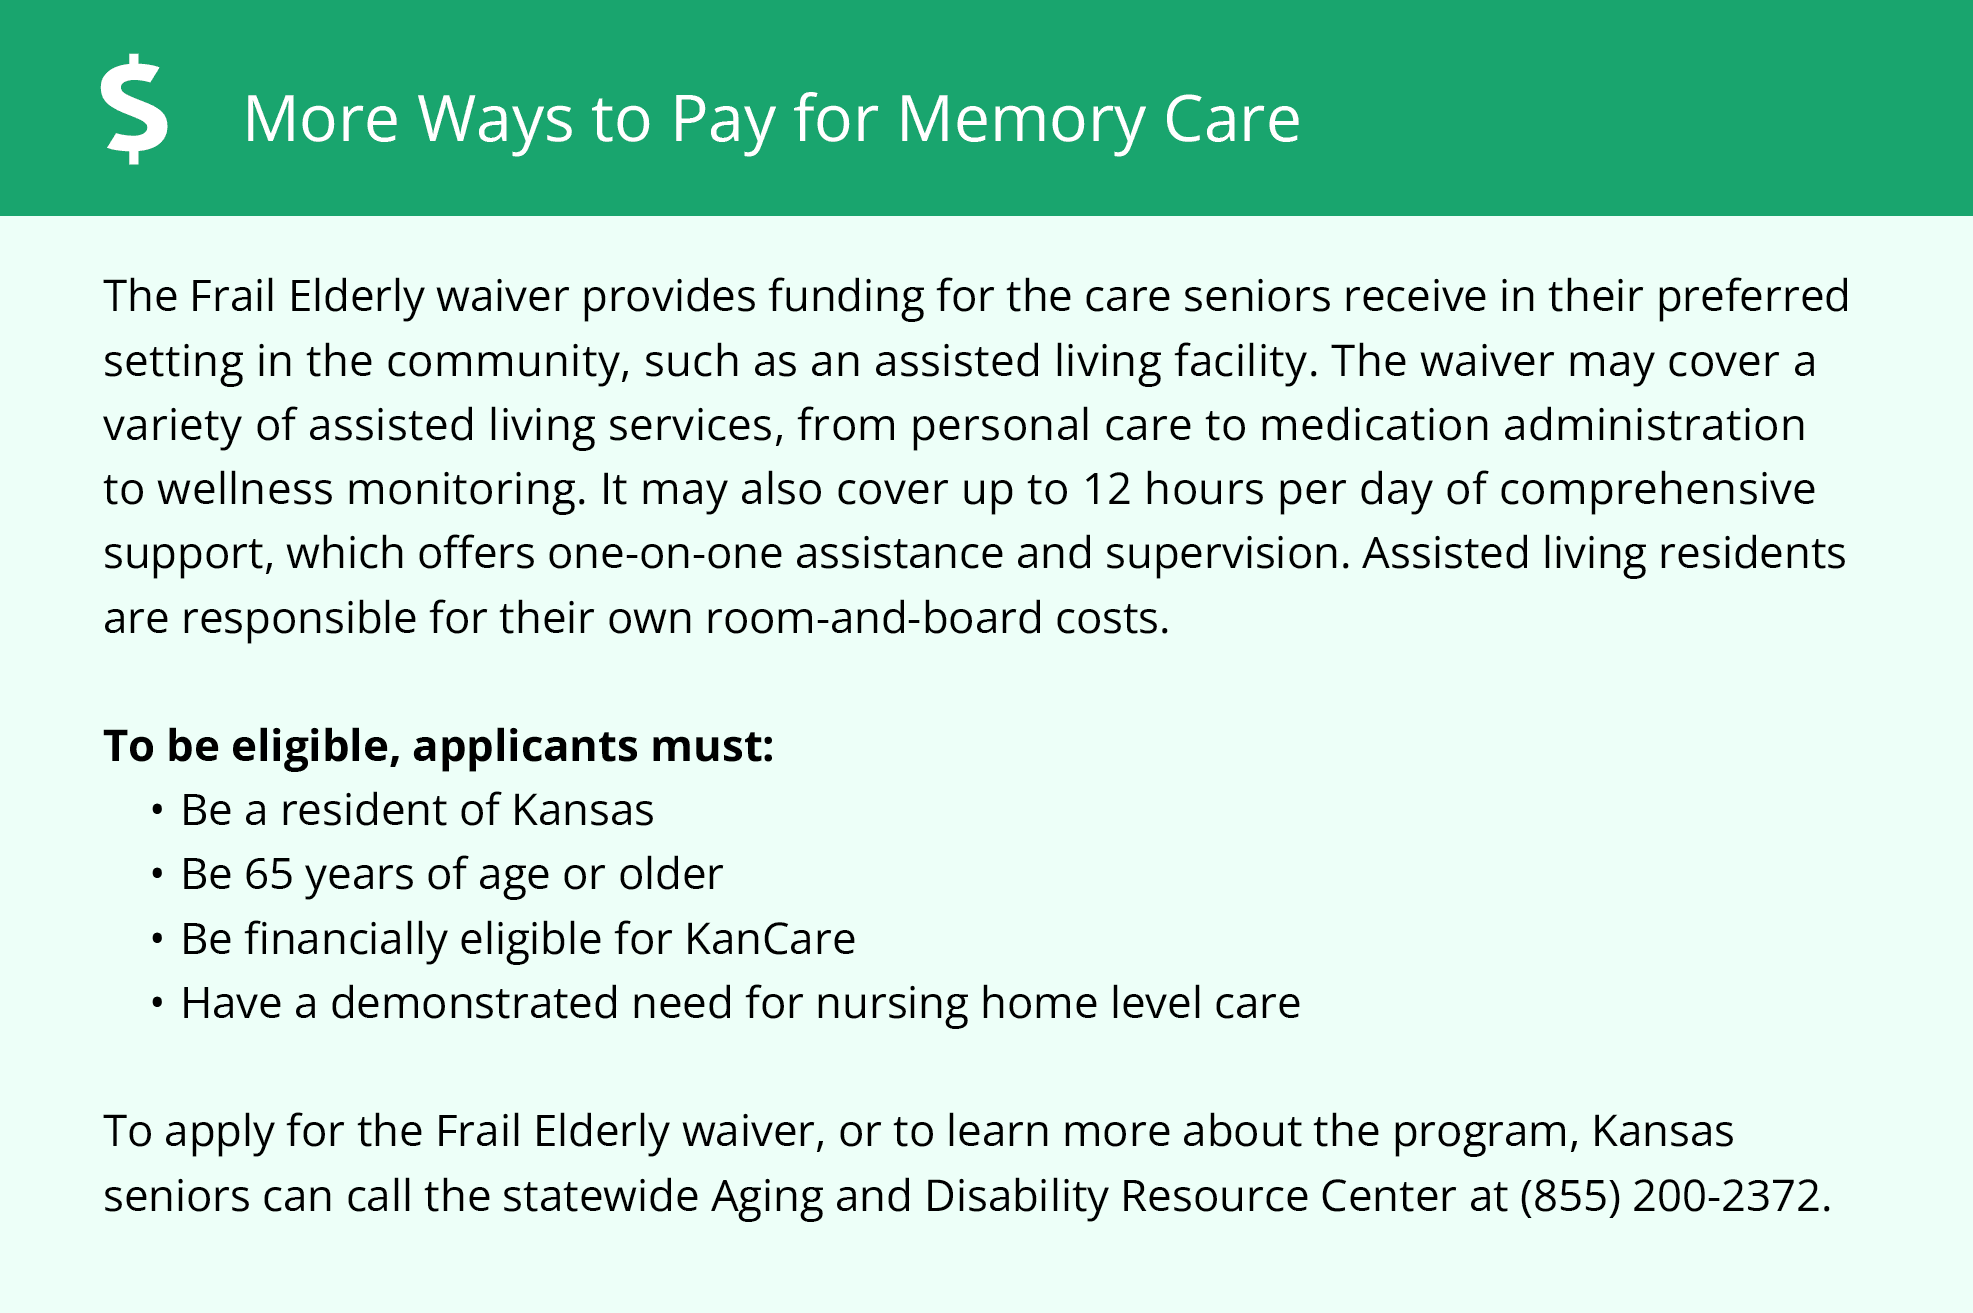 Financial Assistance for Memory Care in Kansas